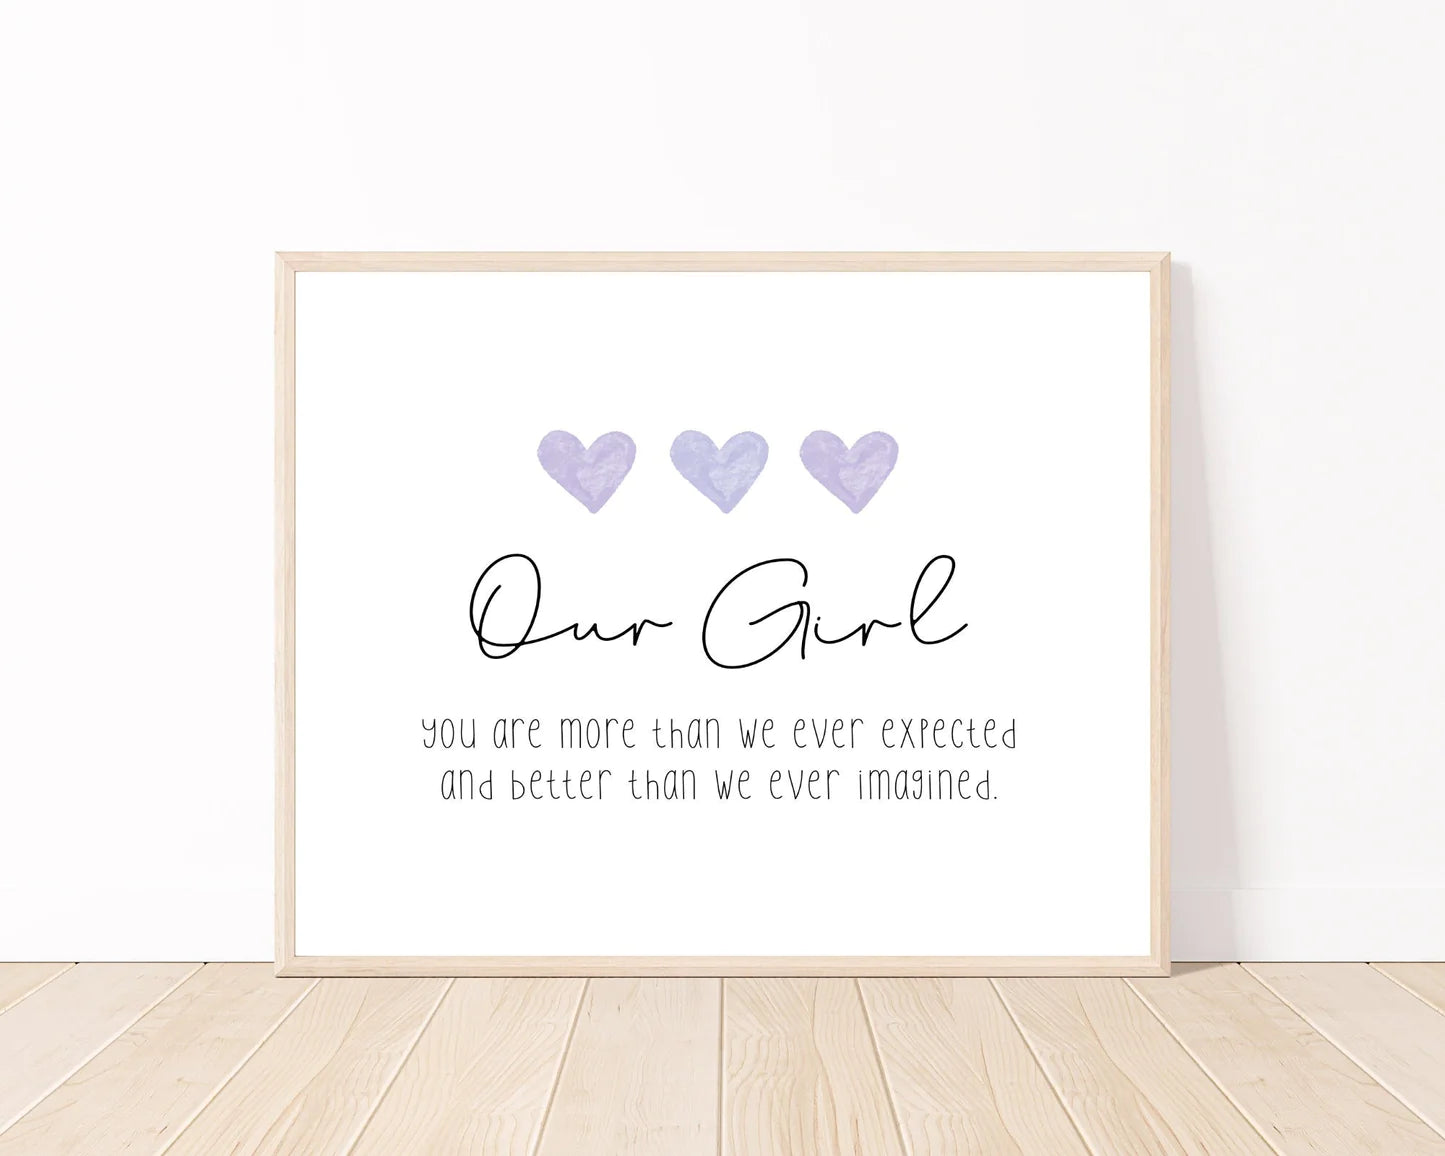 A digital poster that has three purple blue hearts, and a piece of writing below that says: Our girl, you are more than we ever expected, and better than we ever imagined.